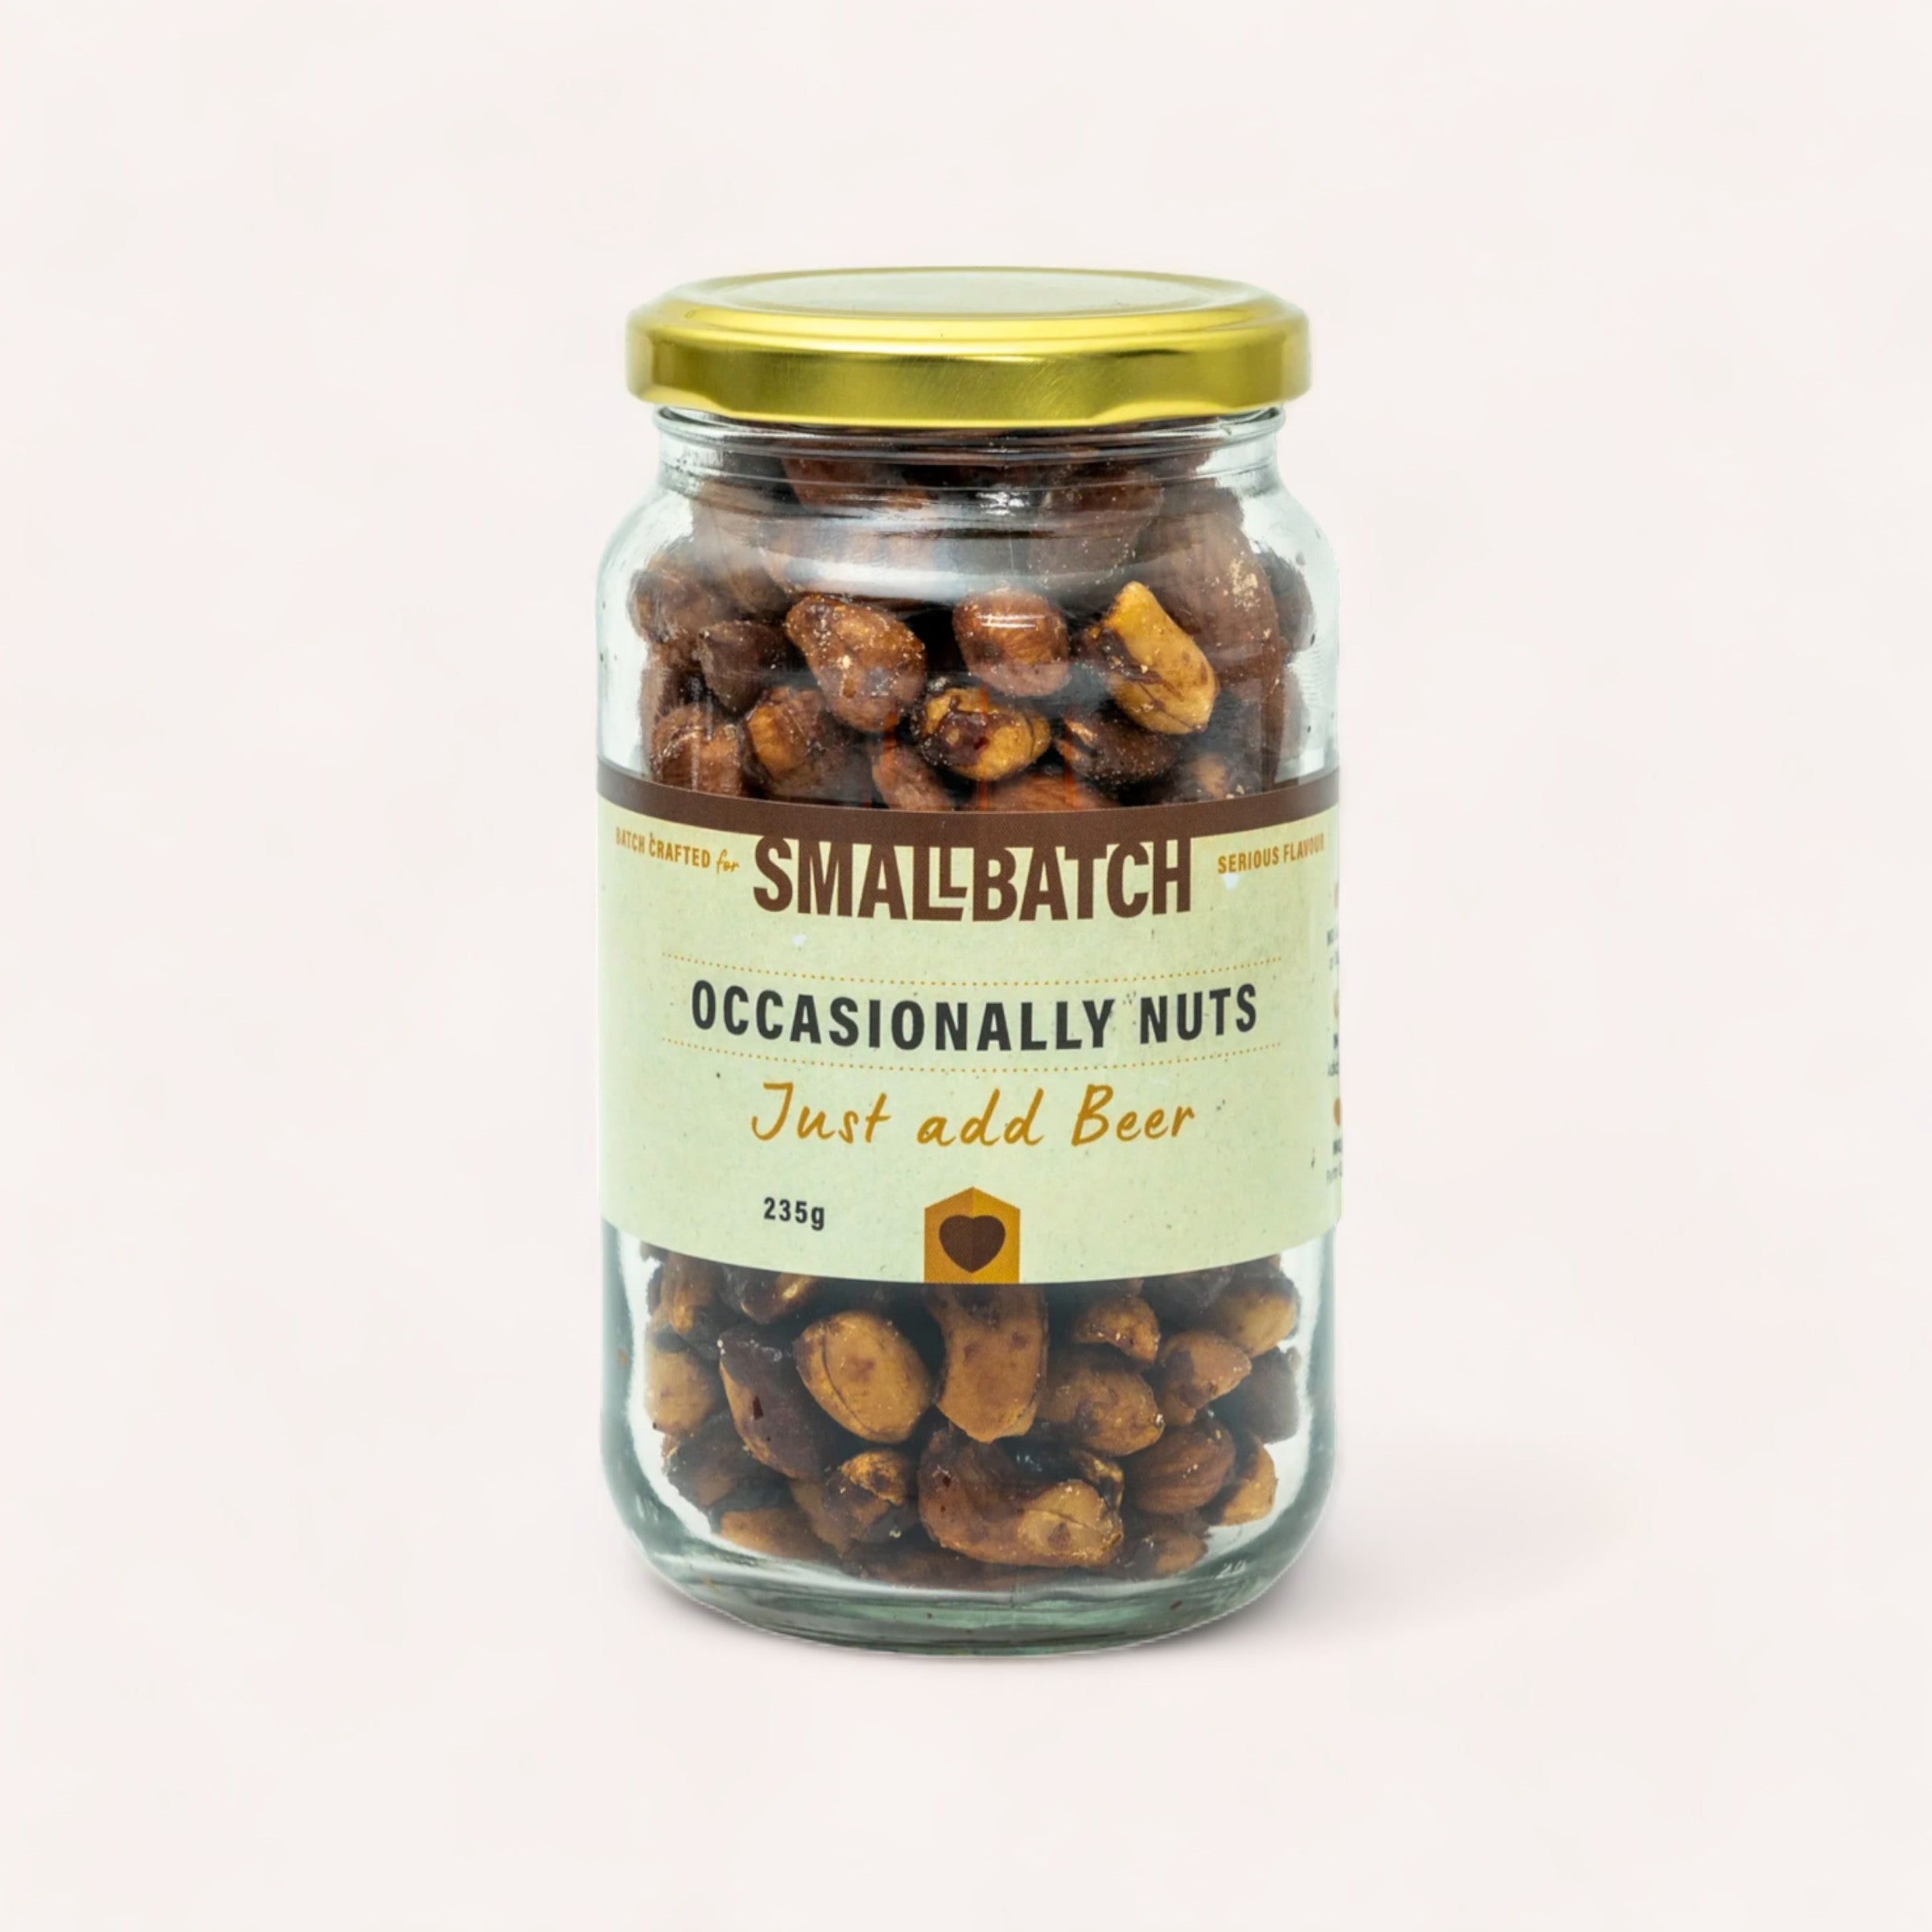 A glass jar filled with Mixed Nuts - Just add Beer by Smallbatch, labeled "Smallbatch - occasionally nuts, just add beer," against a plain white background.